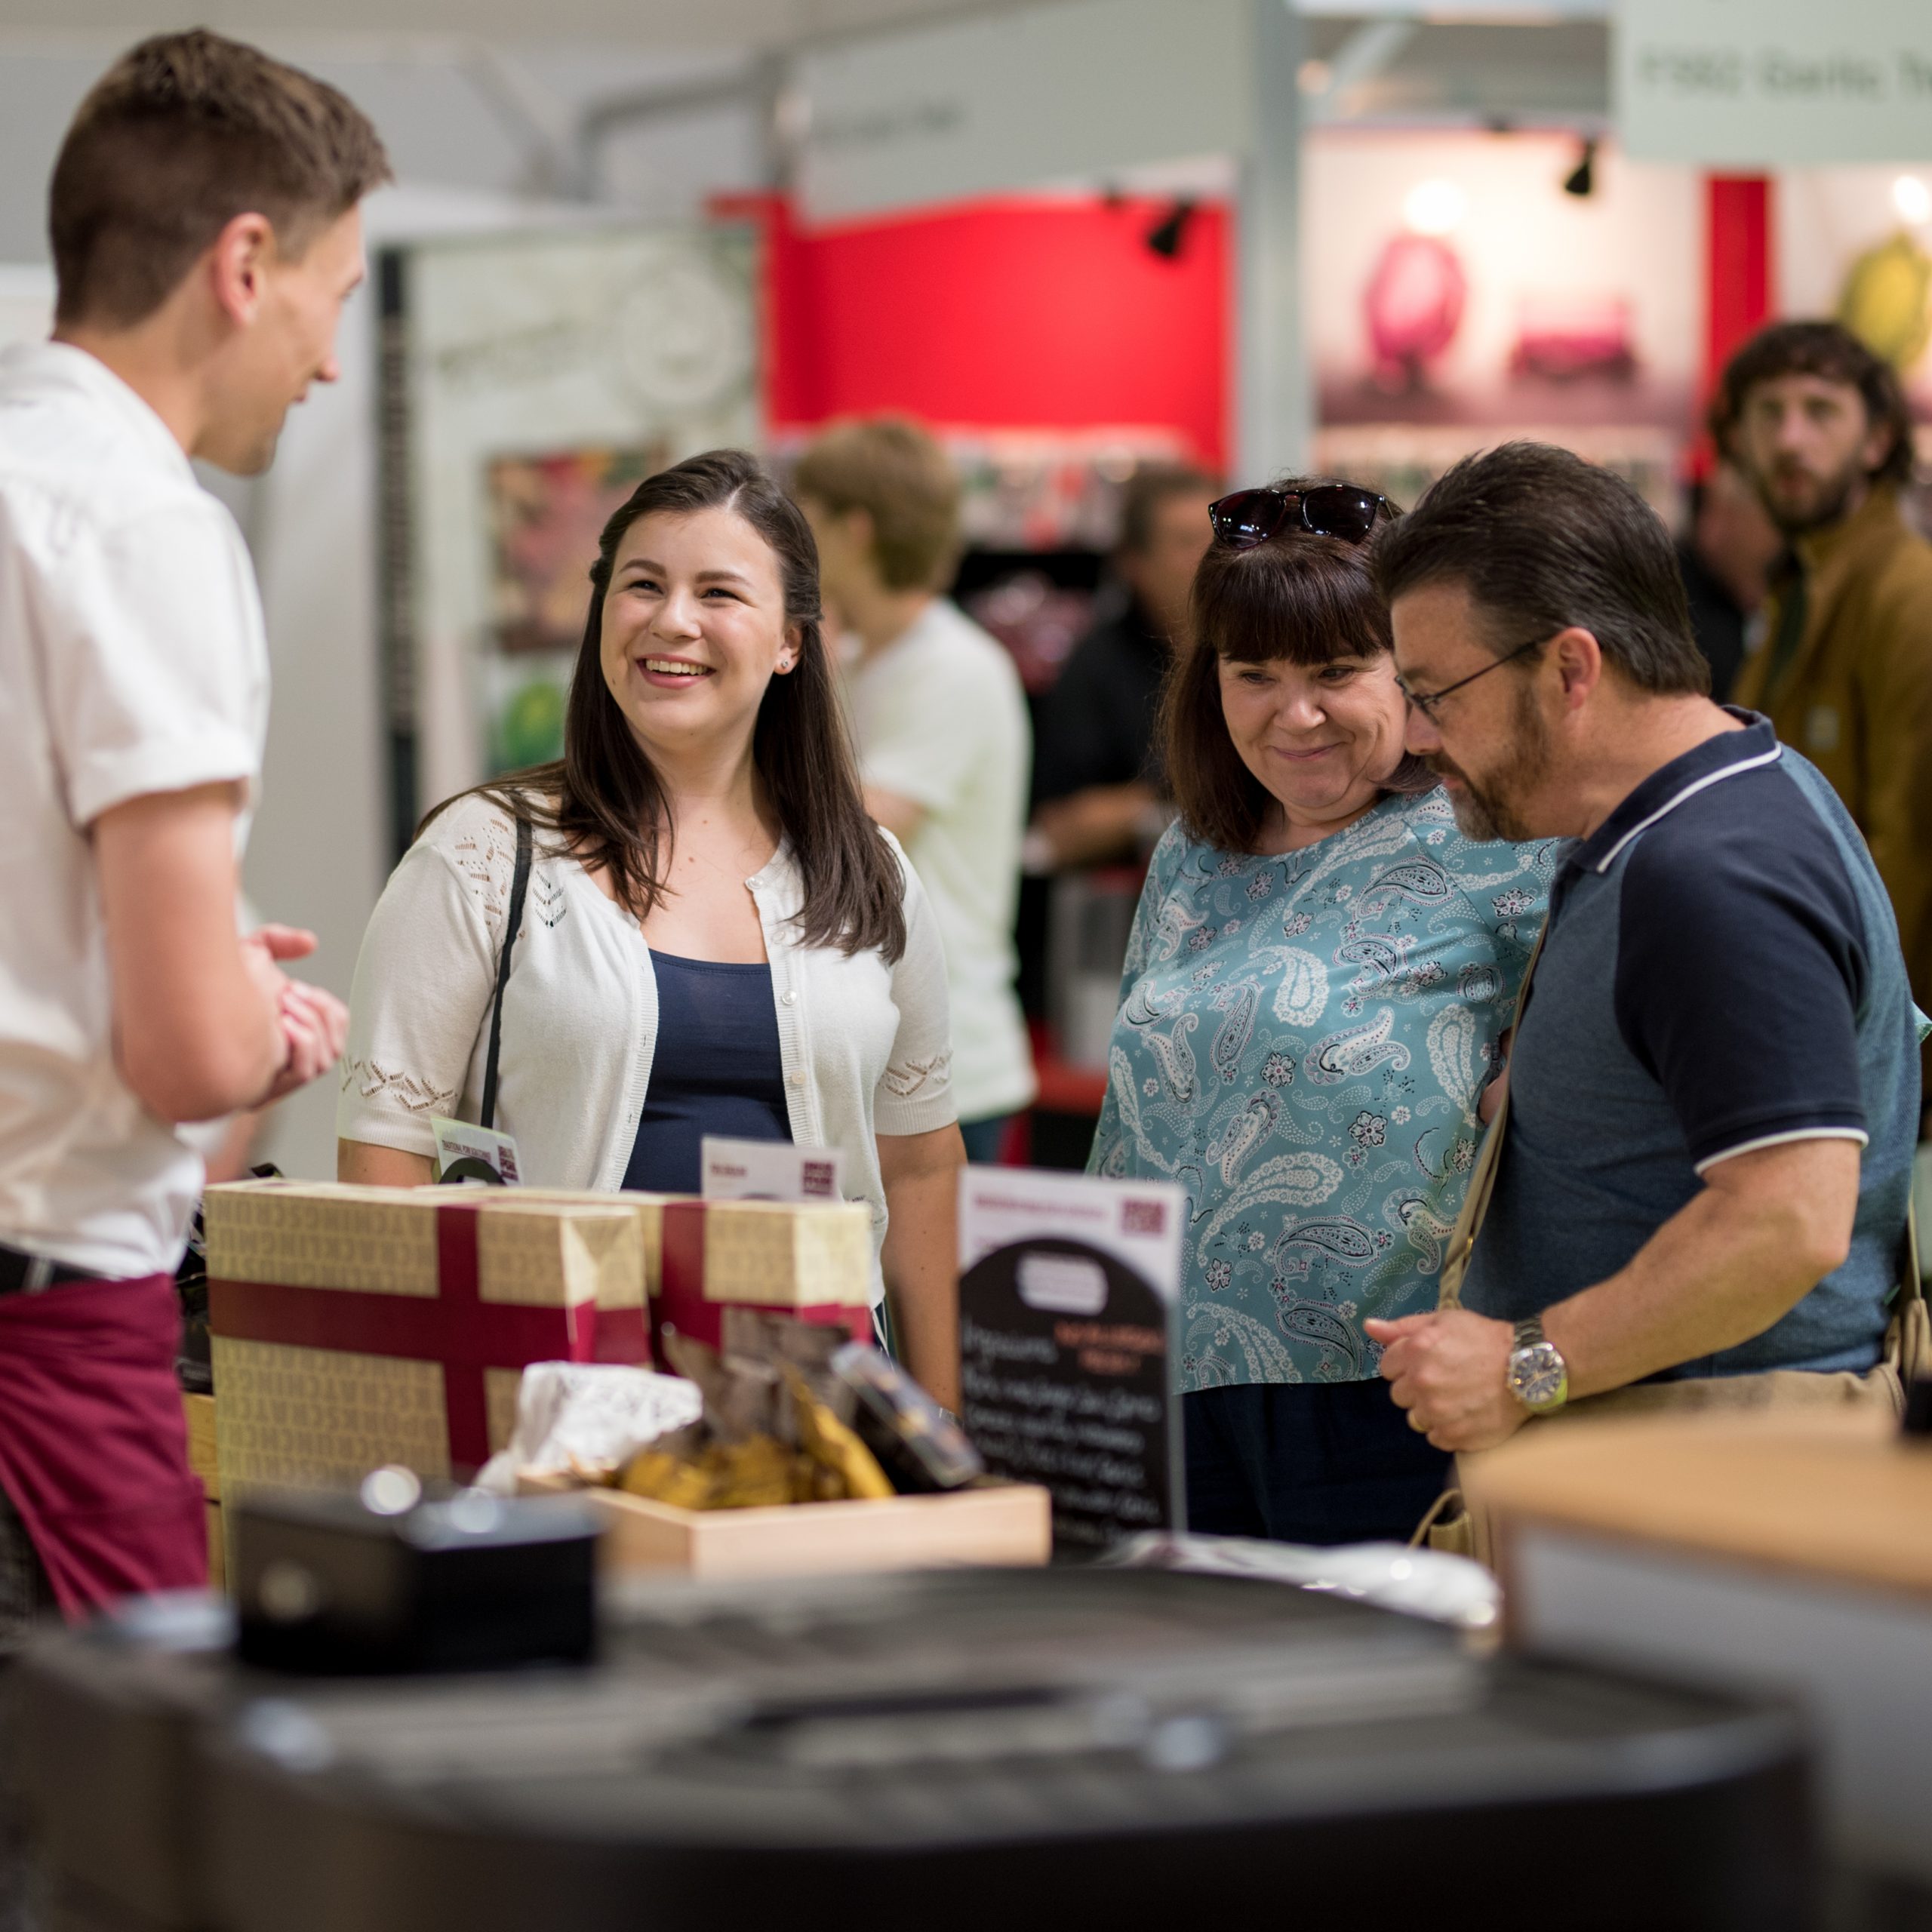 Festivalgoers speaking with an exhibitor at the BBC Good Food Show Summer